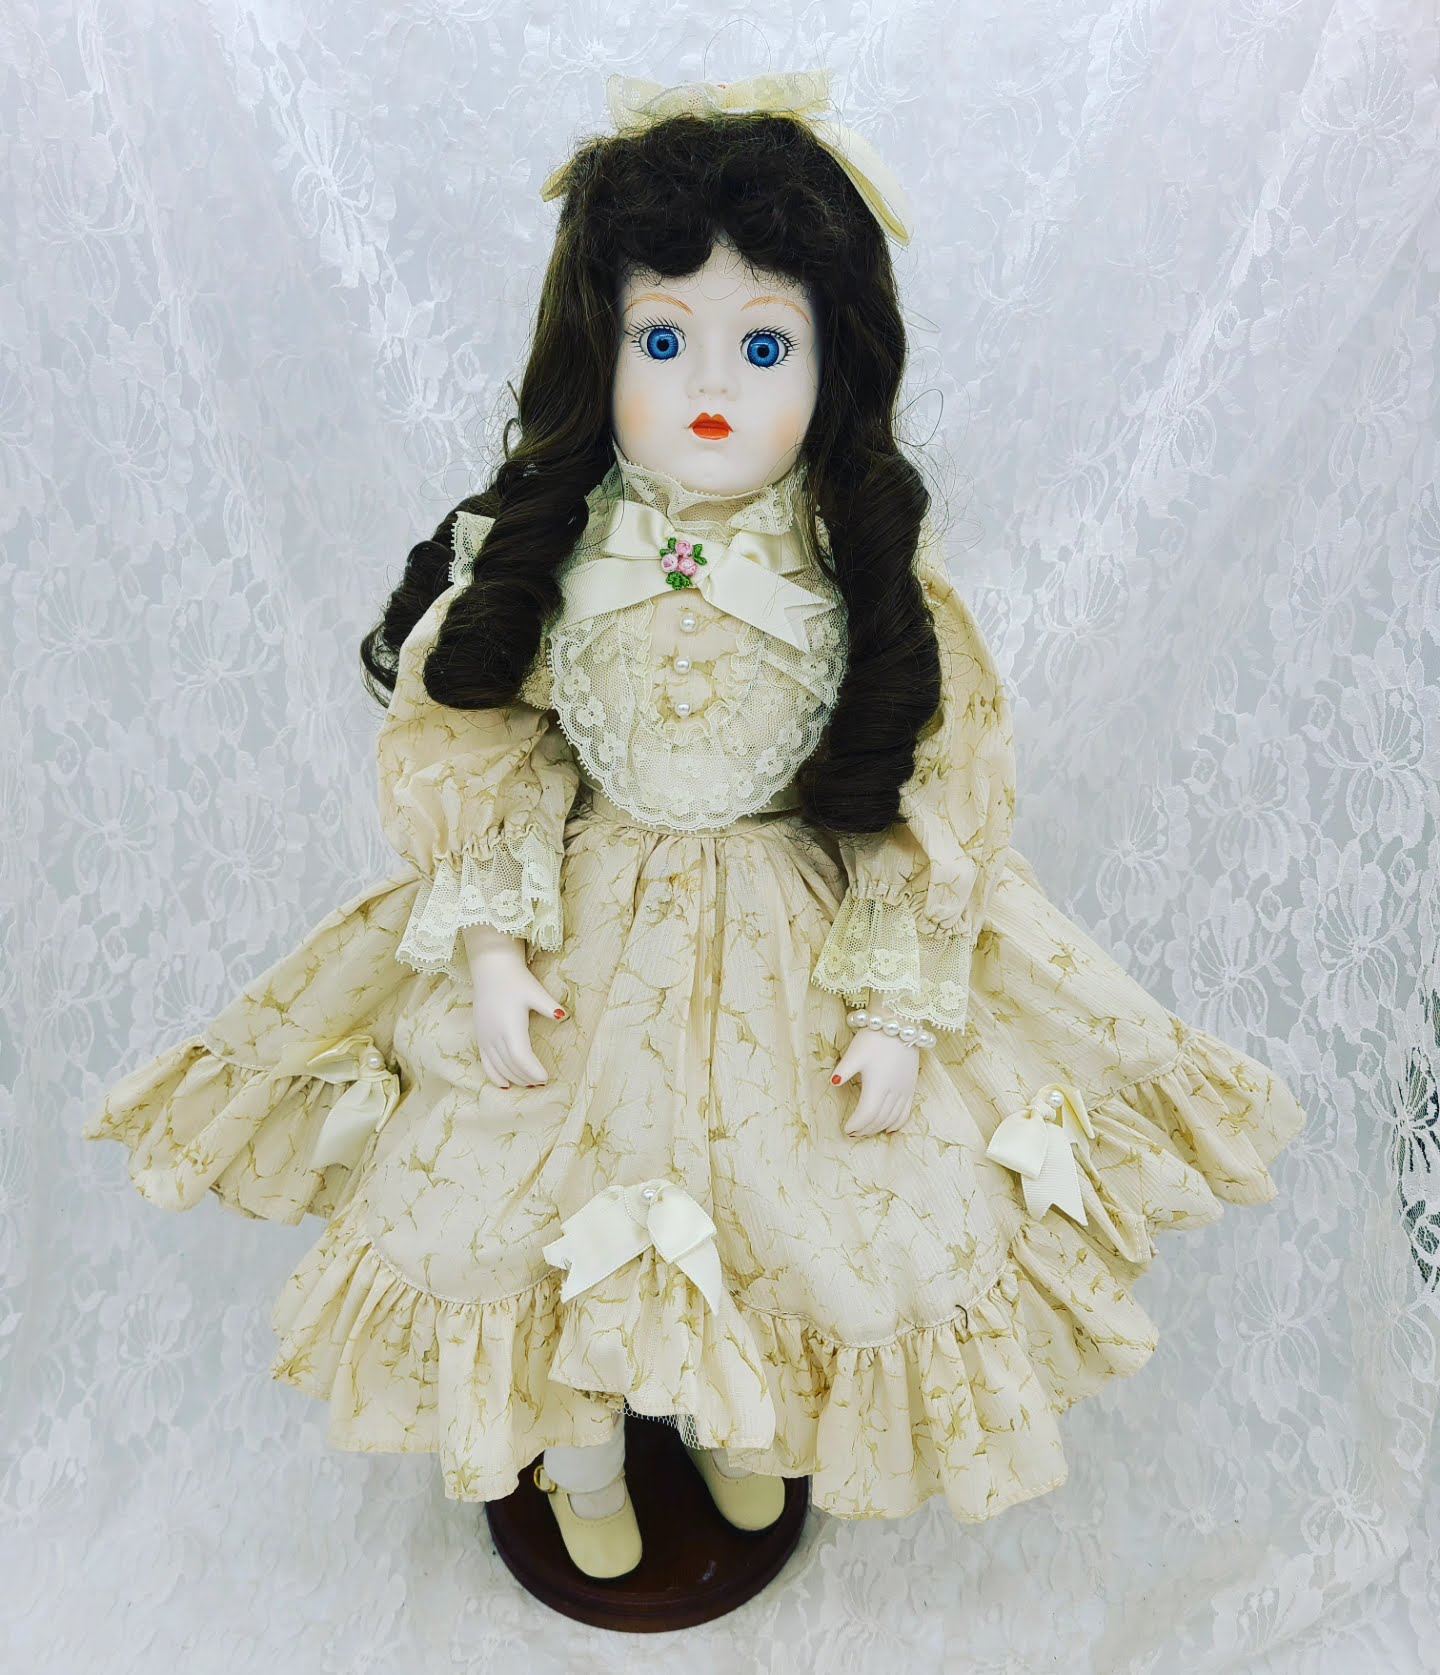 SALE! Rosemarie Haunted Doll ~ 22" Porcelain French Reproduction ~ Paranormal ~ Spooky Eyes ~ ACTIVE ~ Troubled